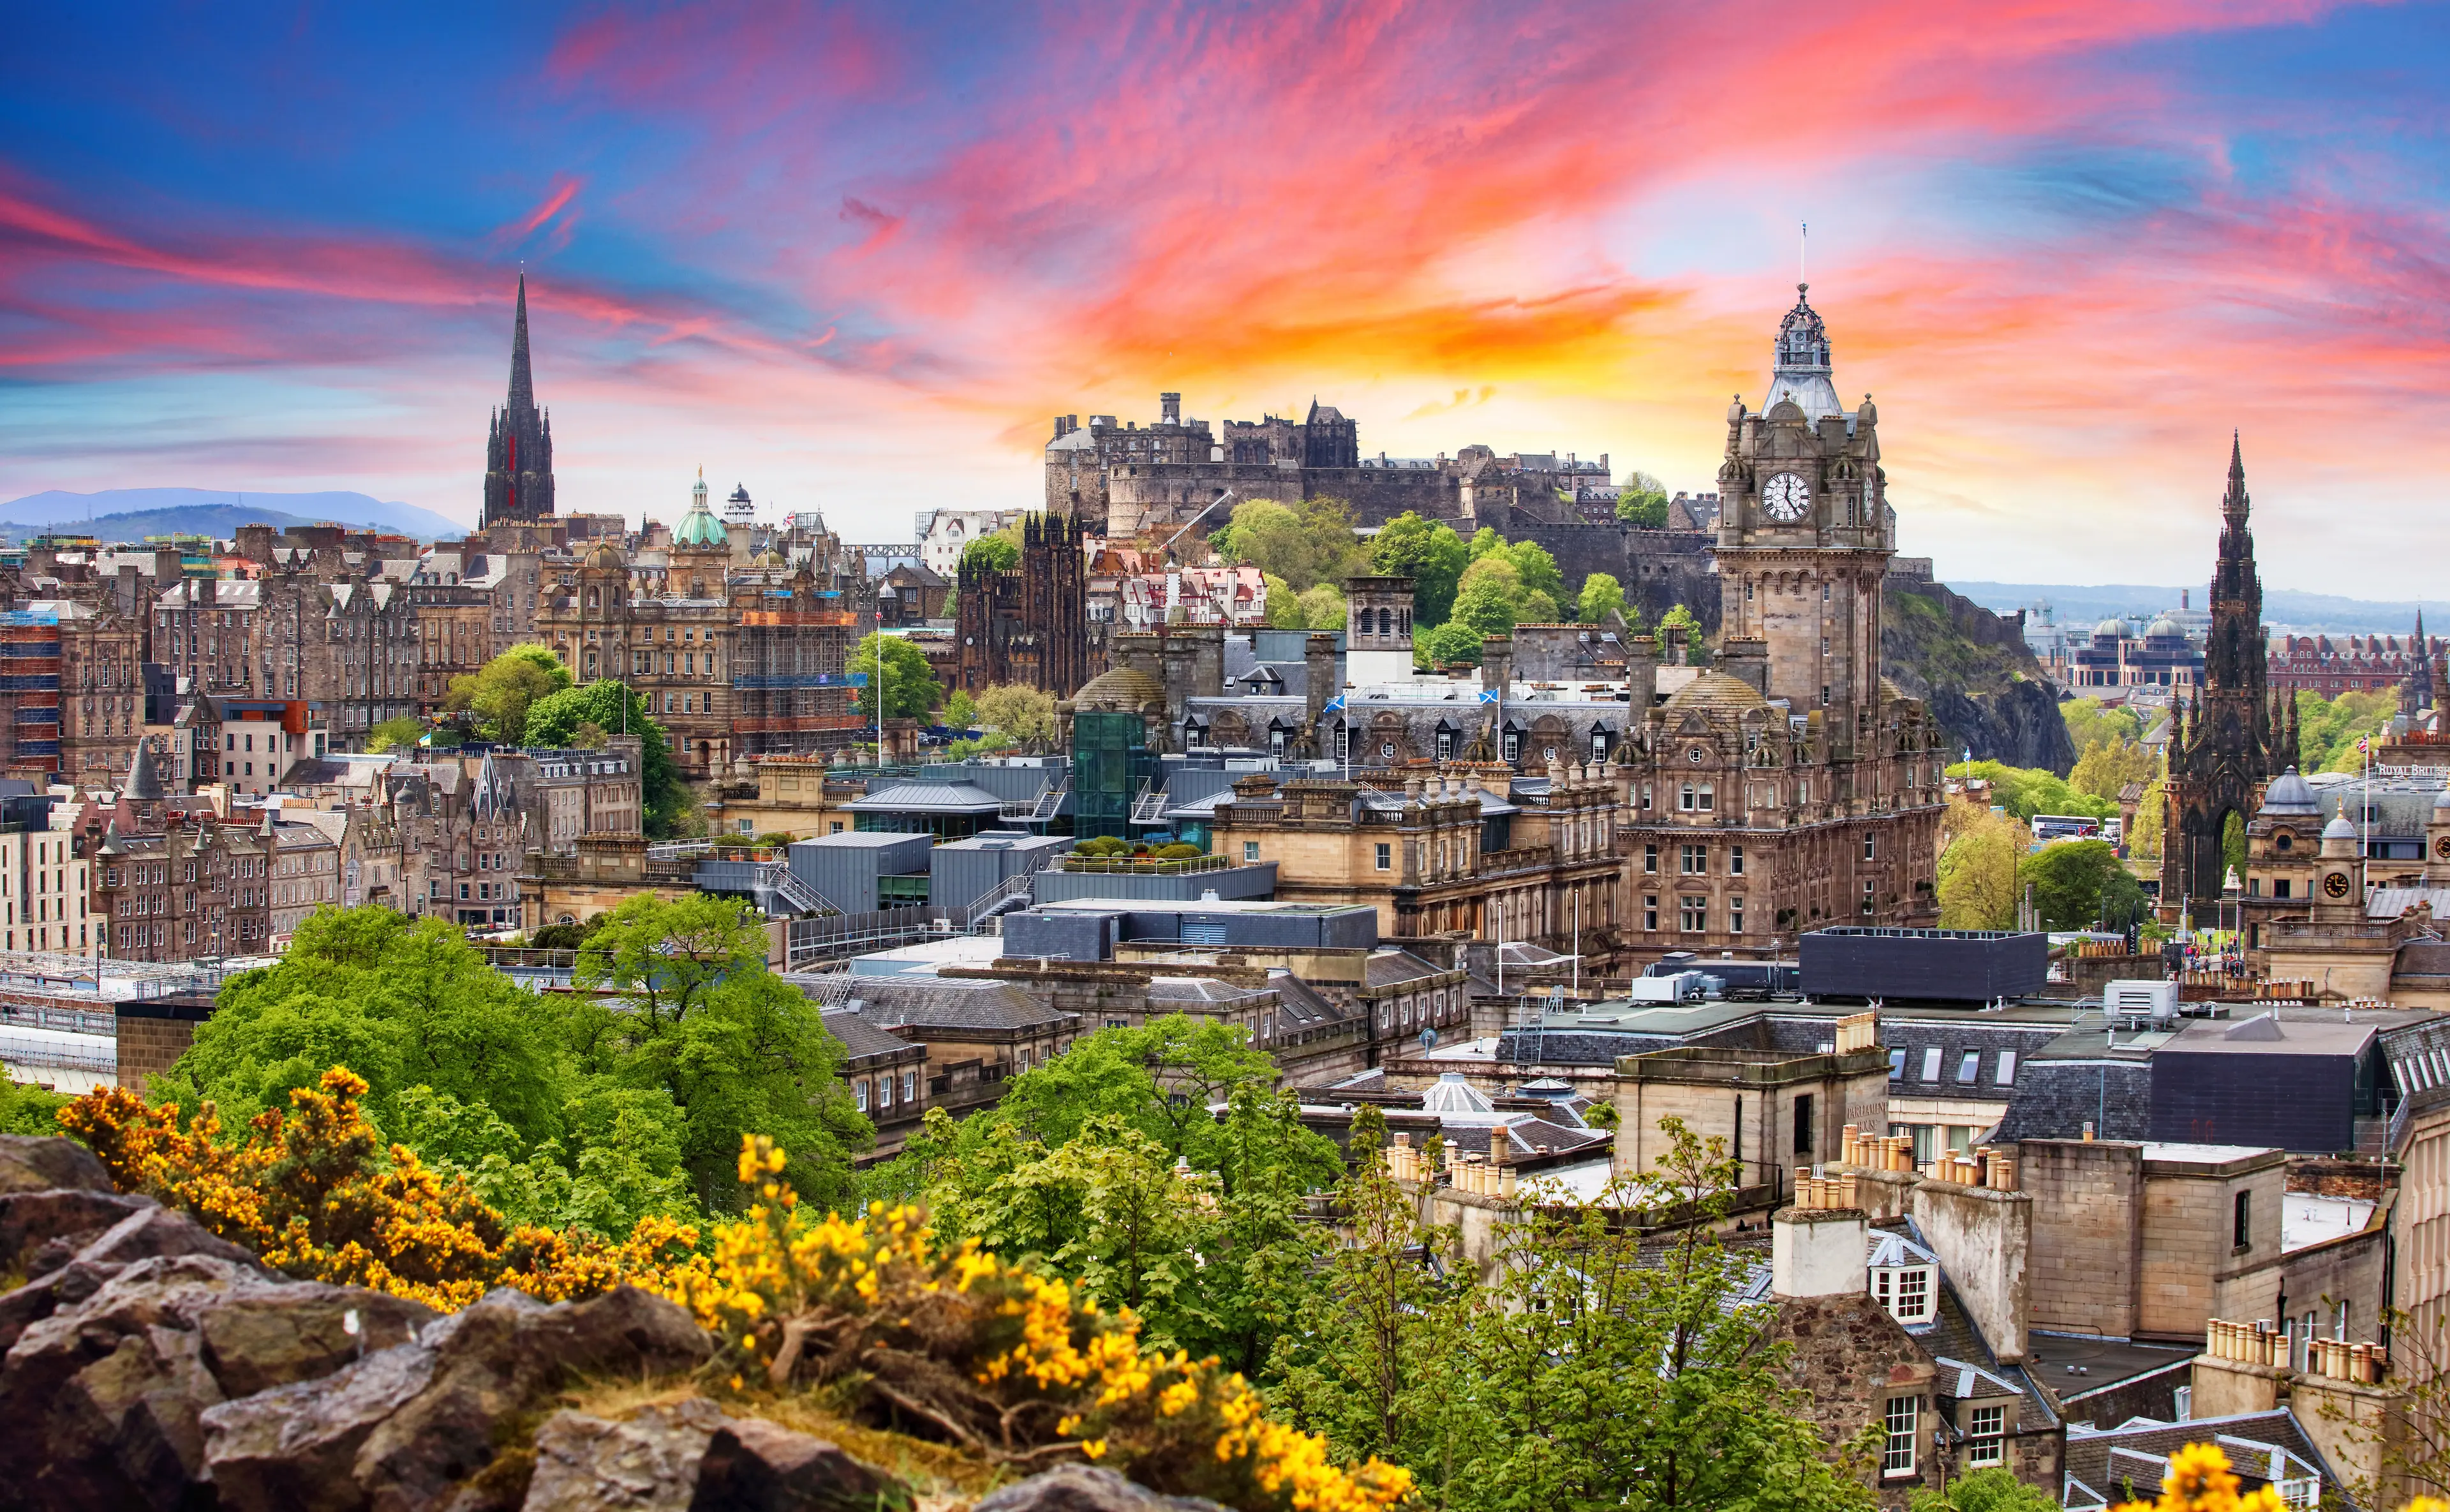 3-Day Family Adventure and Sightseeing Tour in Edinburgh, Scotland